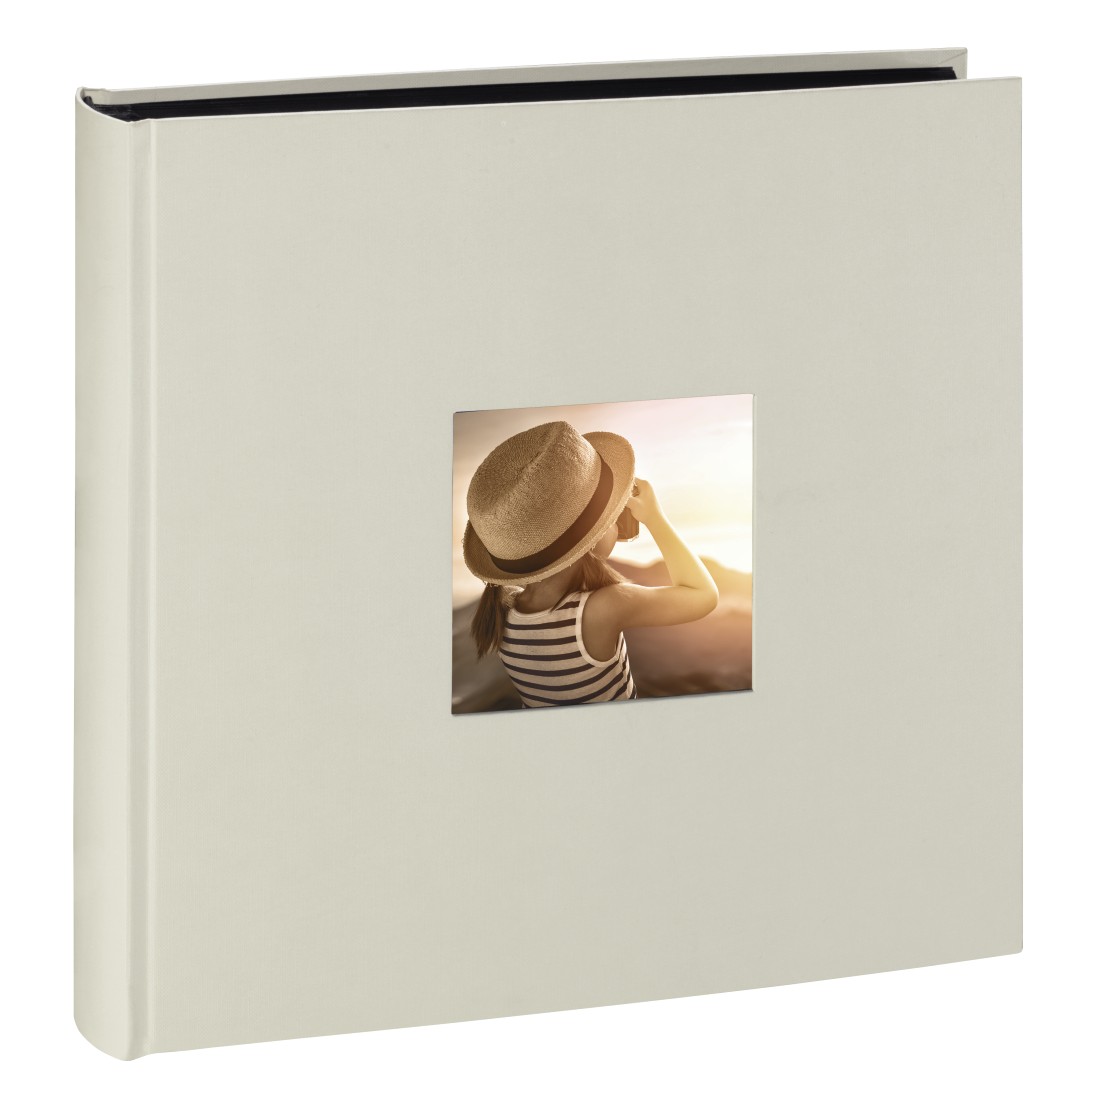 Hama Fine Art Album - Classical look - gives an elegant, timeless touch | Fotoalben